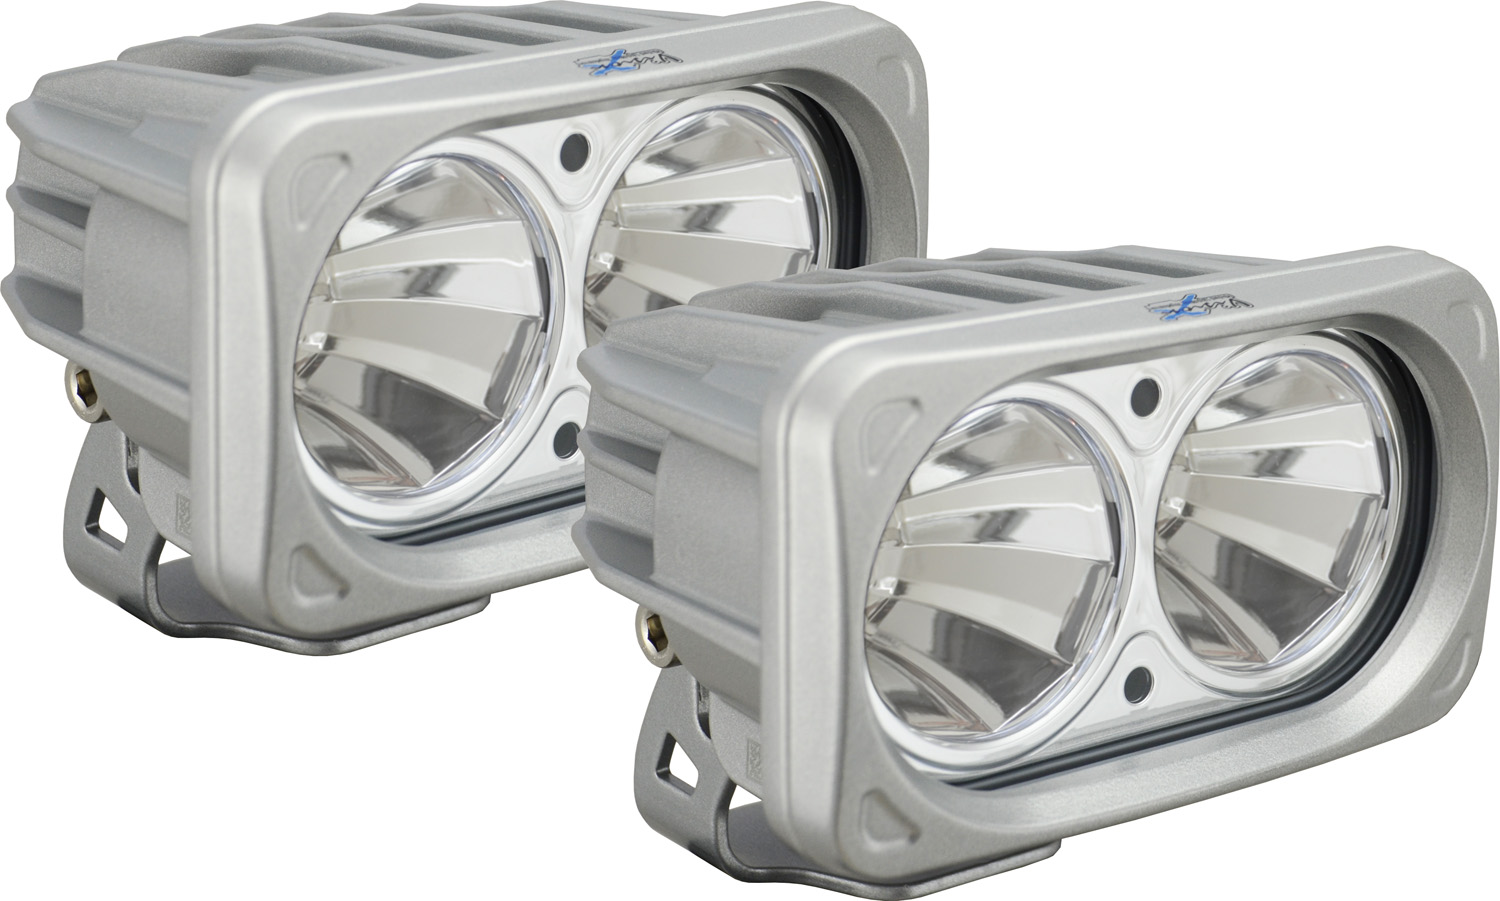 OPTIMUS SQUARE SILVER 2 10W LEDS 60° FLOOD KIT OF 2 LIGHTS - Click Image to Close